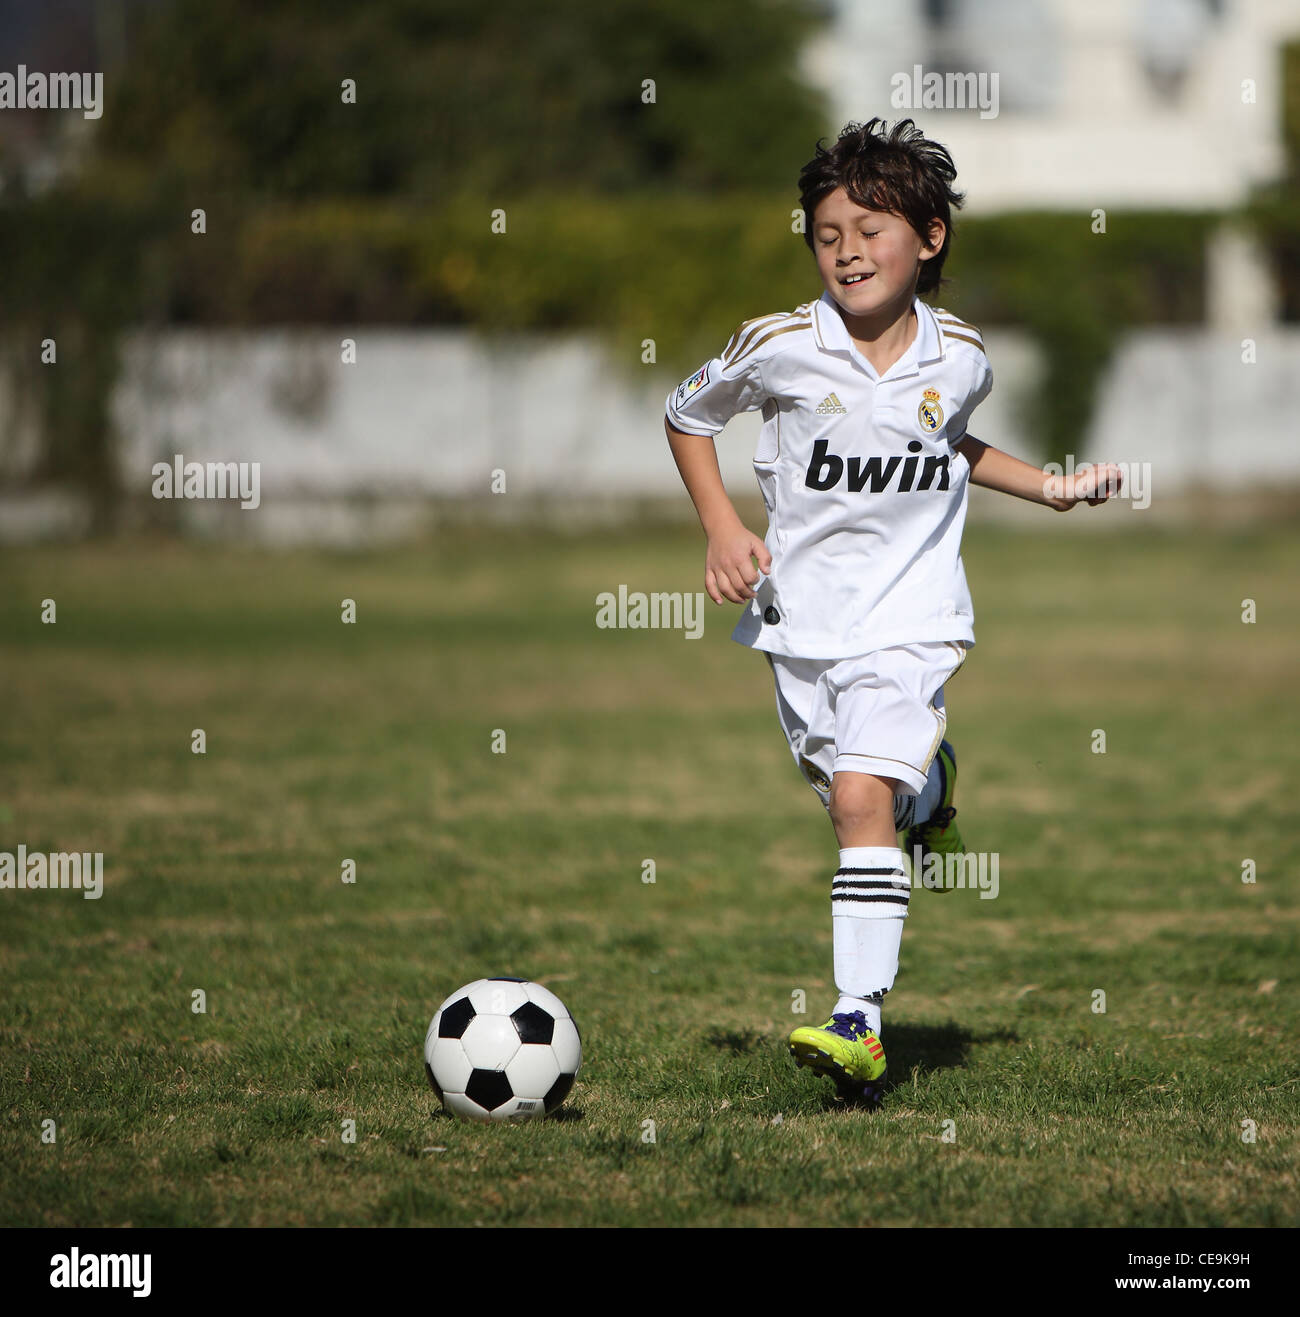 Young boy dressed in Real Madrid uniform practices soccer for a youth team in Southern California.  Soccer is becoming popular. Stock Photo